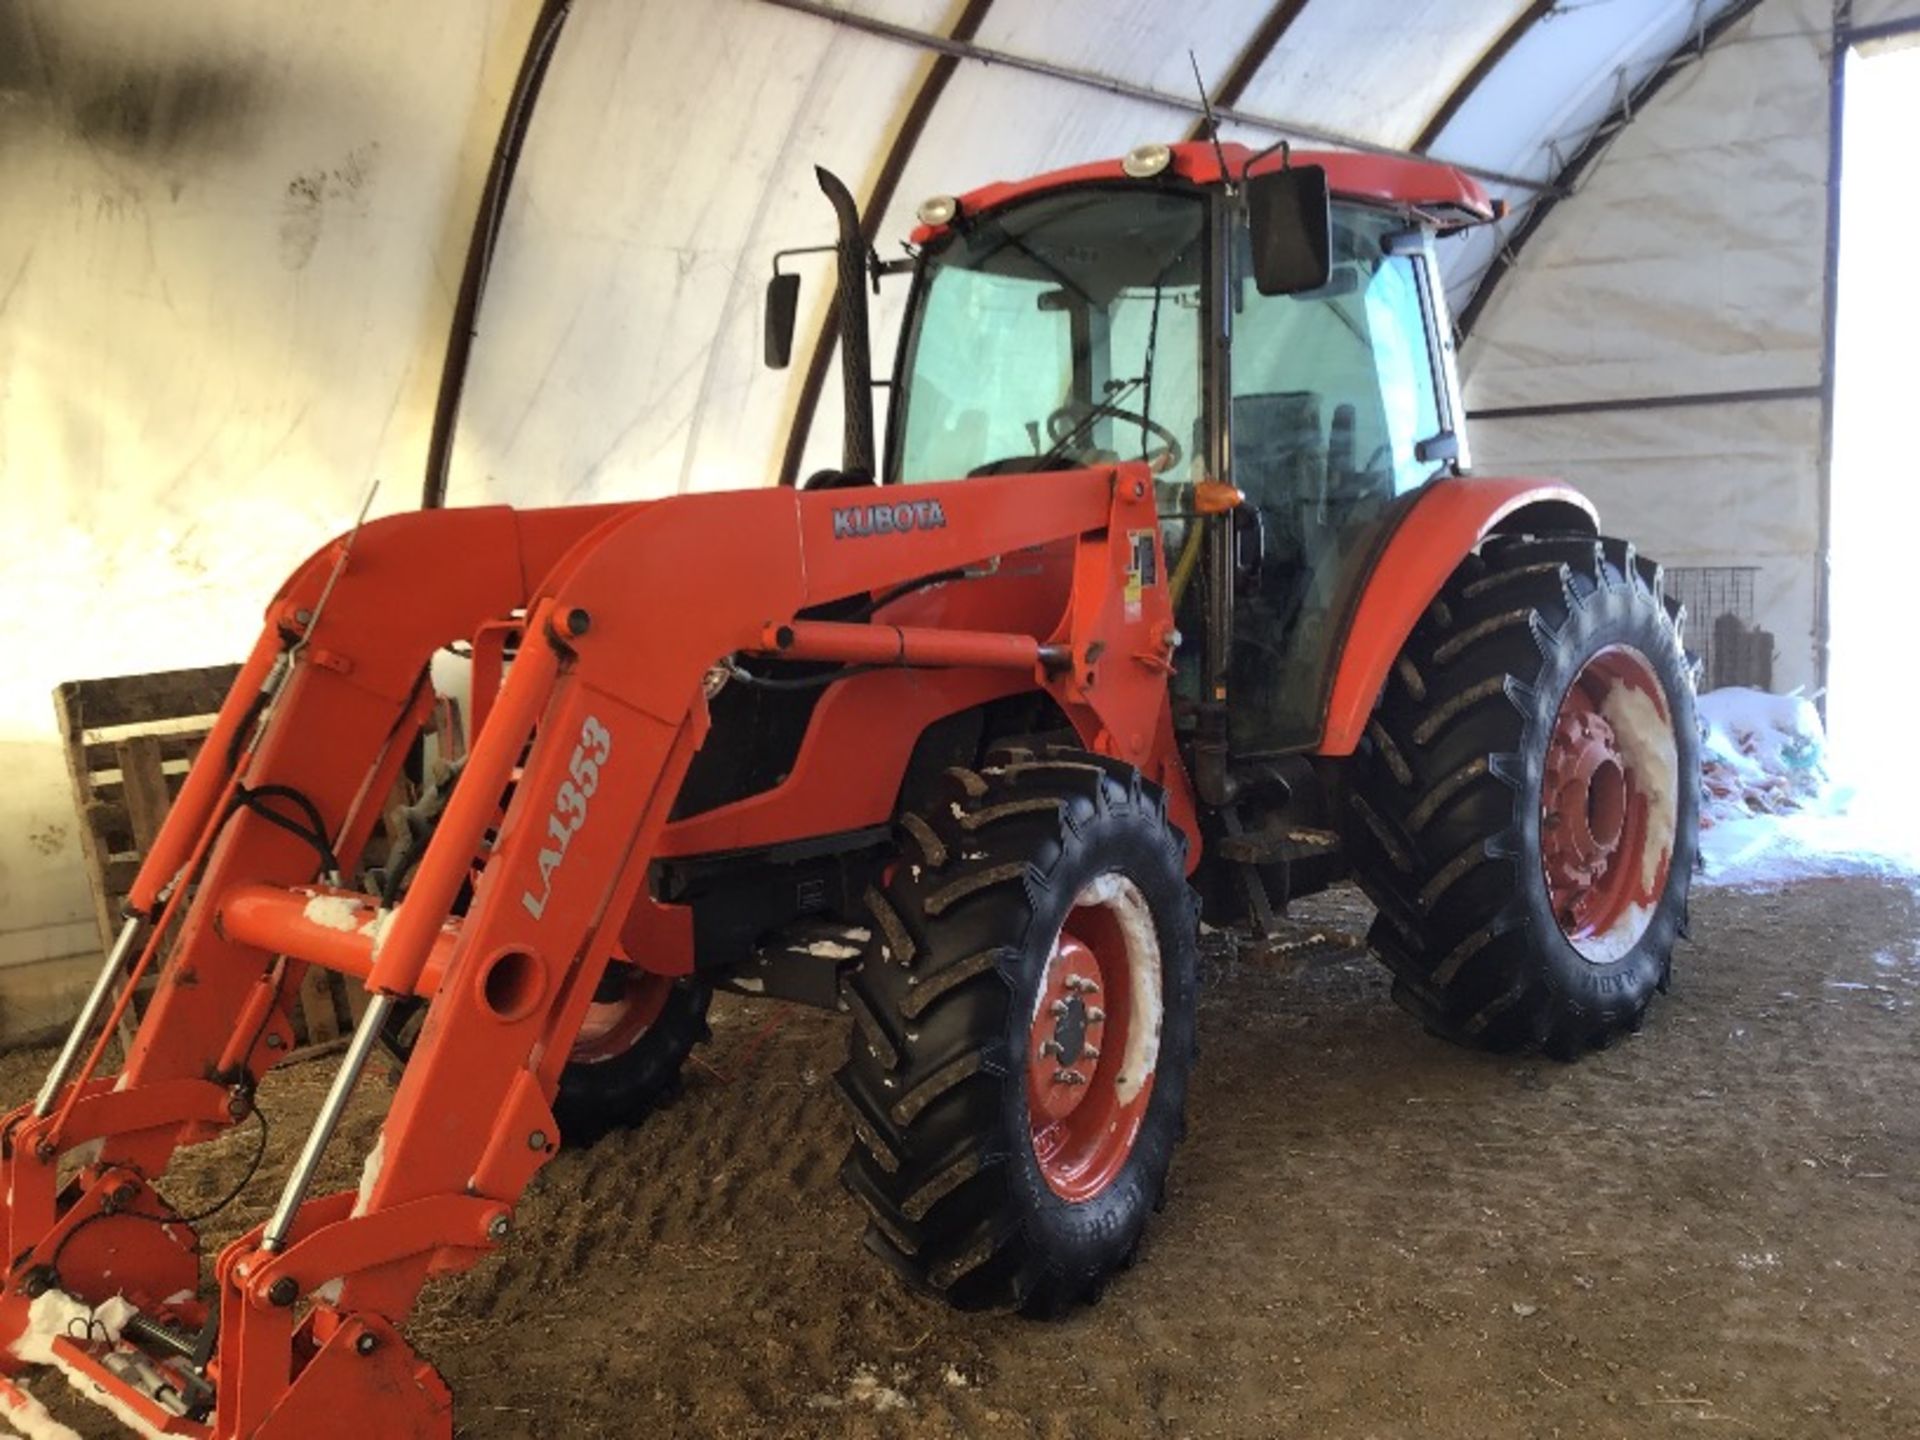 2011 M9540 Kubota Tractor W/ LA353 Front End Loader & Bucket, 2 Forks(may sell sepesrate), 1104 - Image 2 of 12